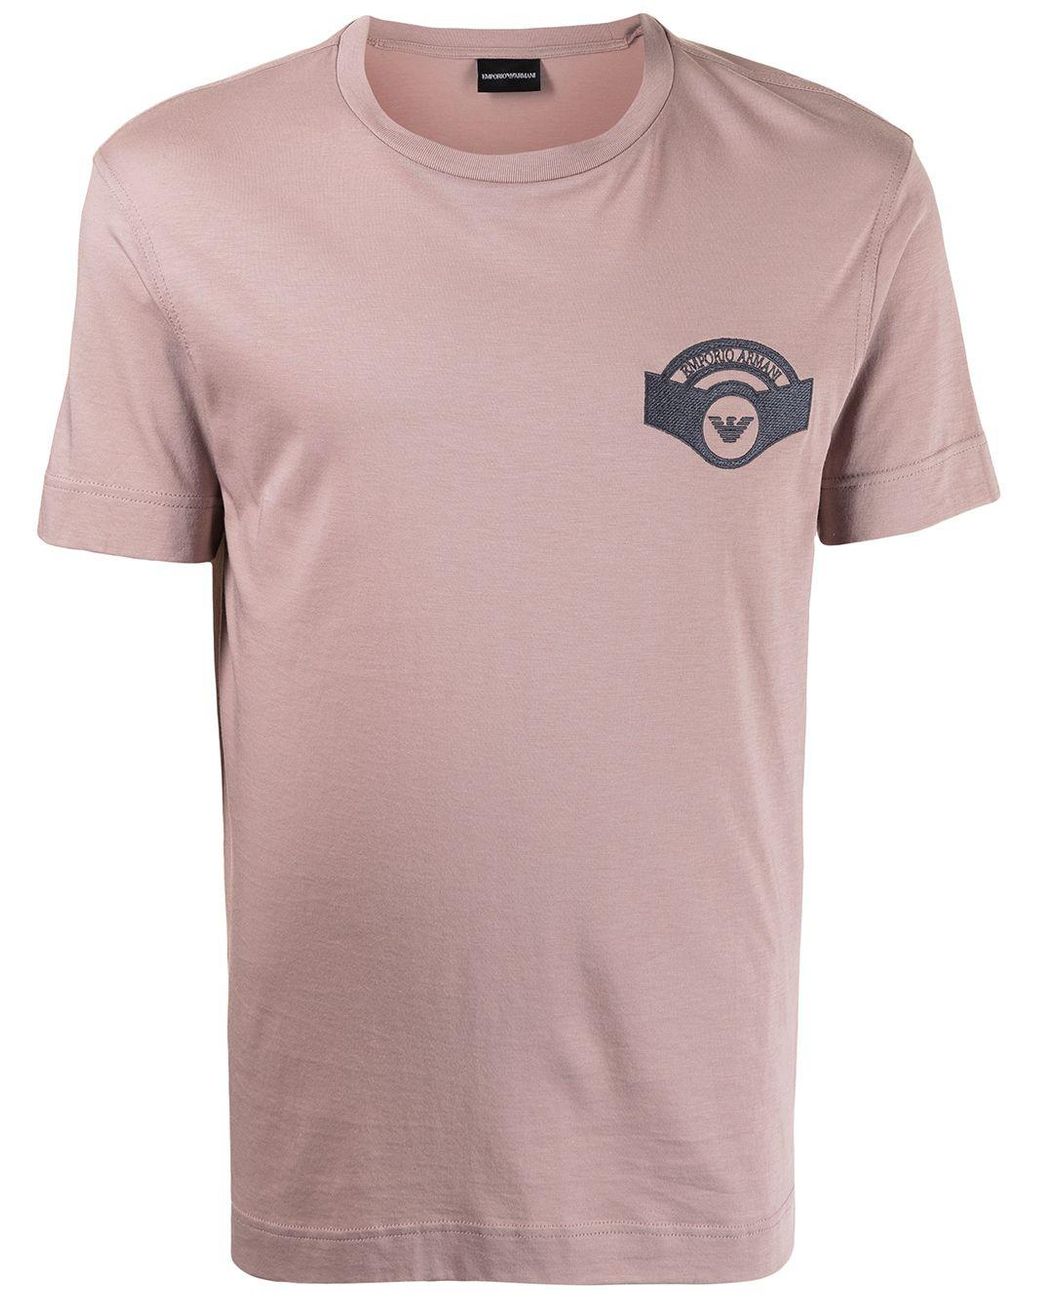 Emporio Armani Logo-print Cotton T-shirt in Pink for Men - Lyst